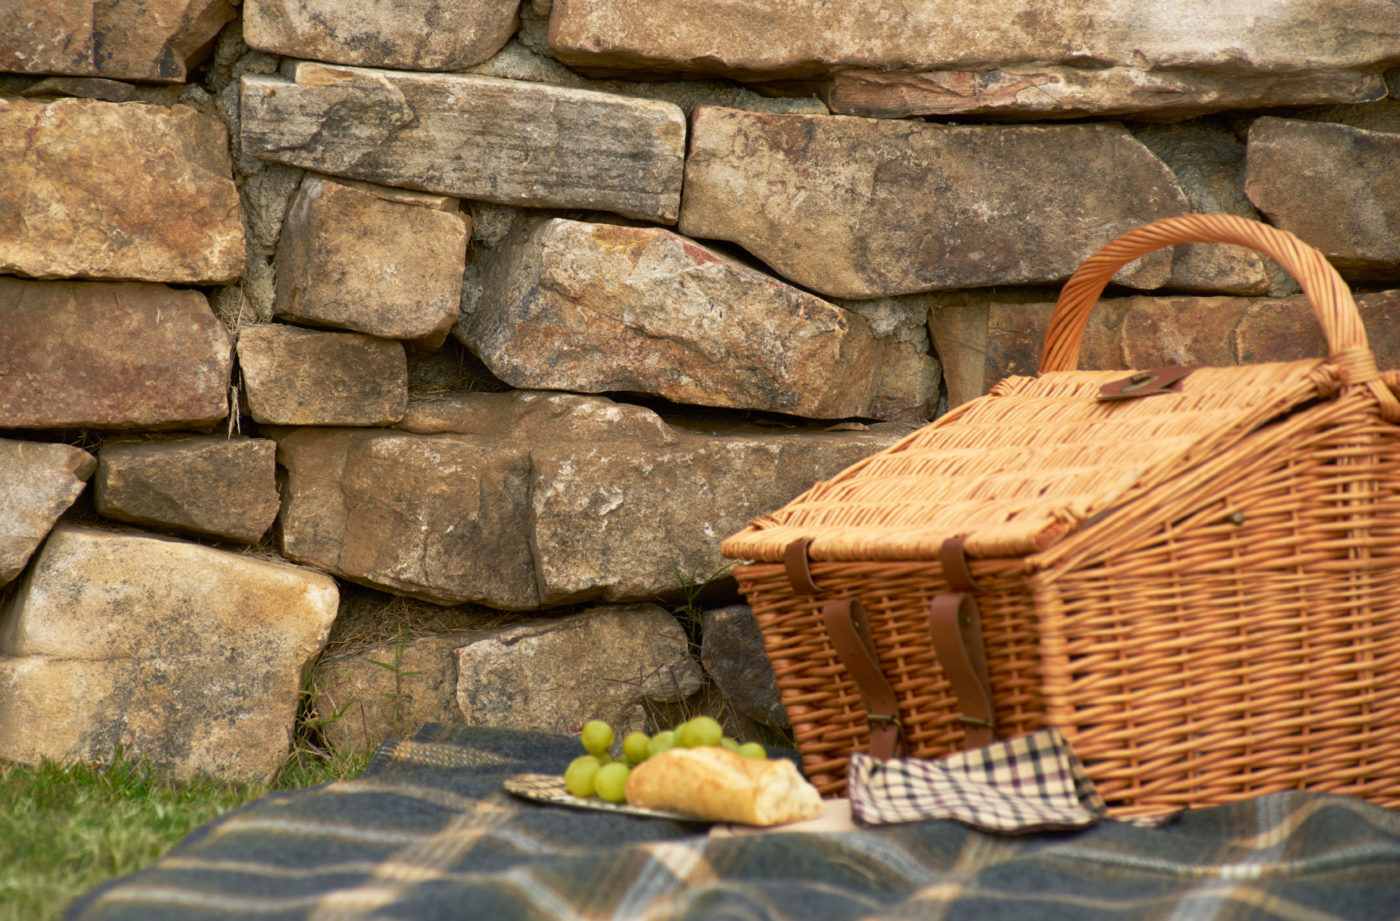 A picnic basket and a plate of food sits atop a plaid blanket next to a stone wall.